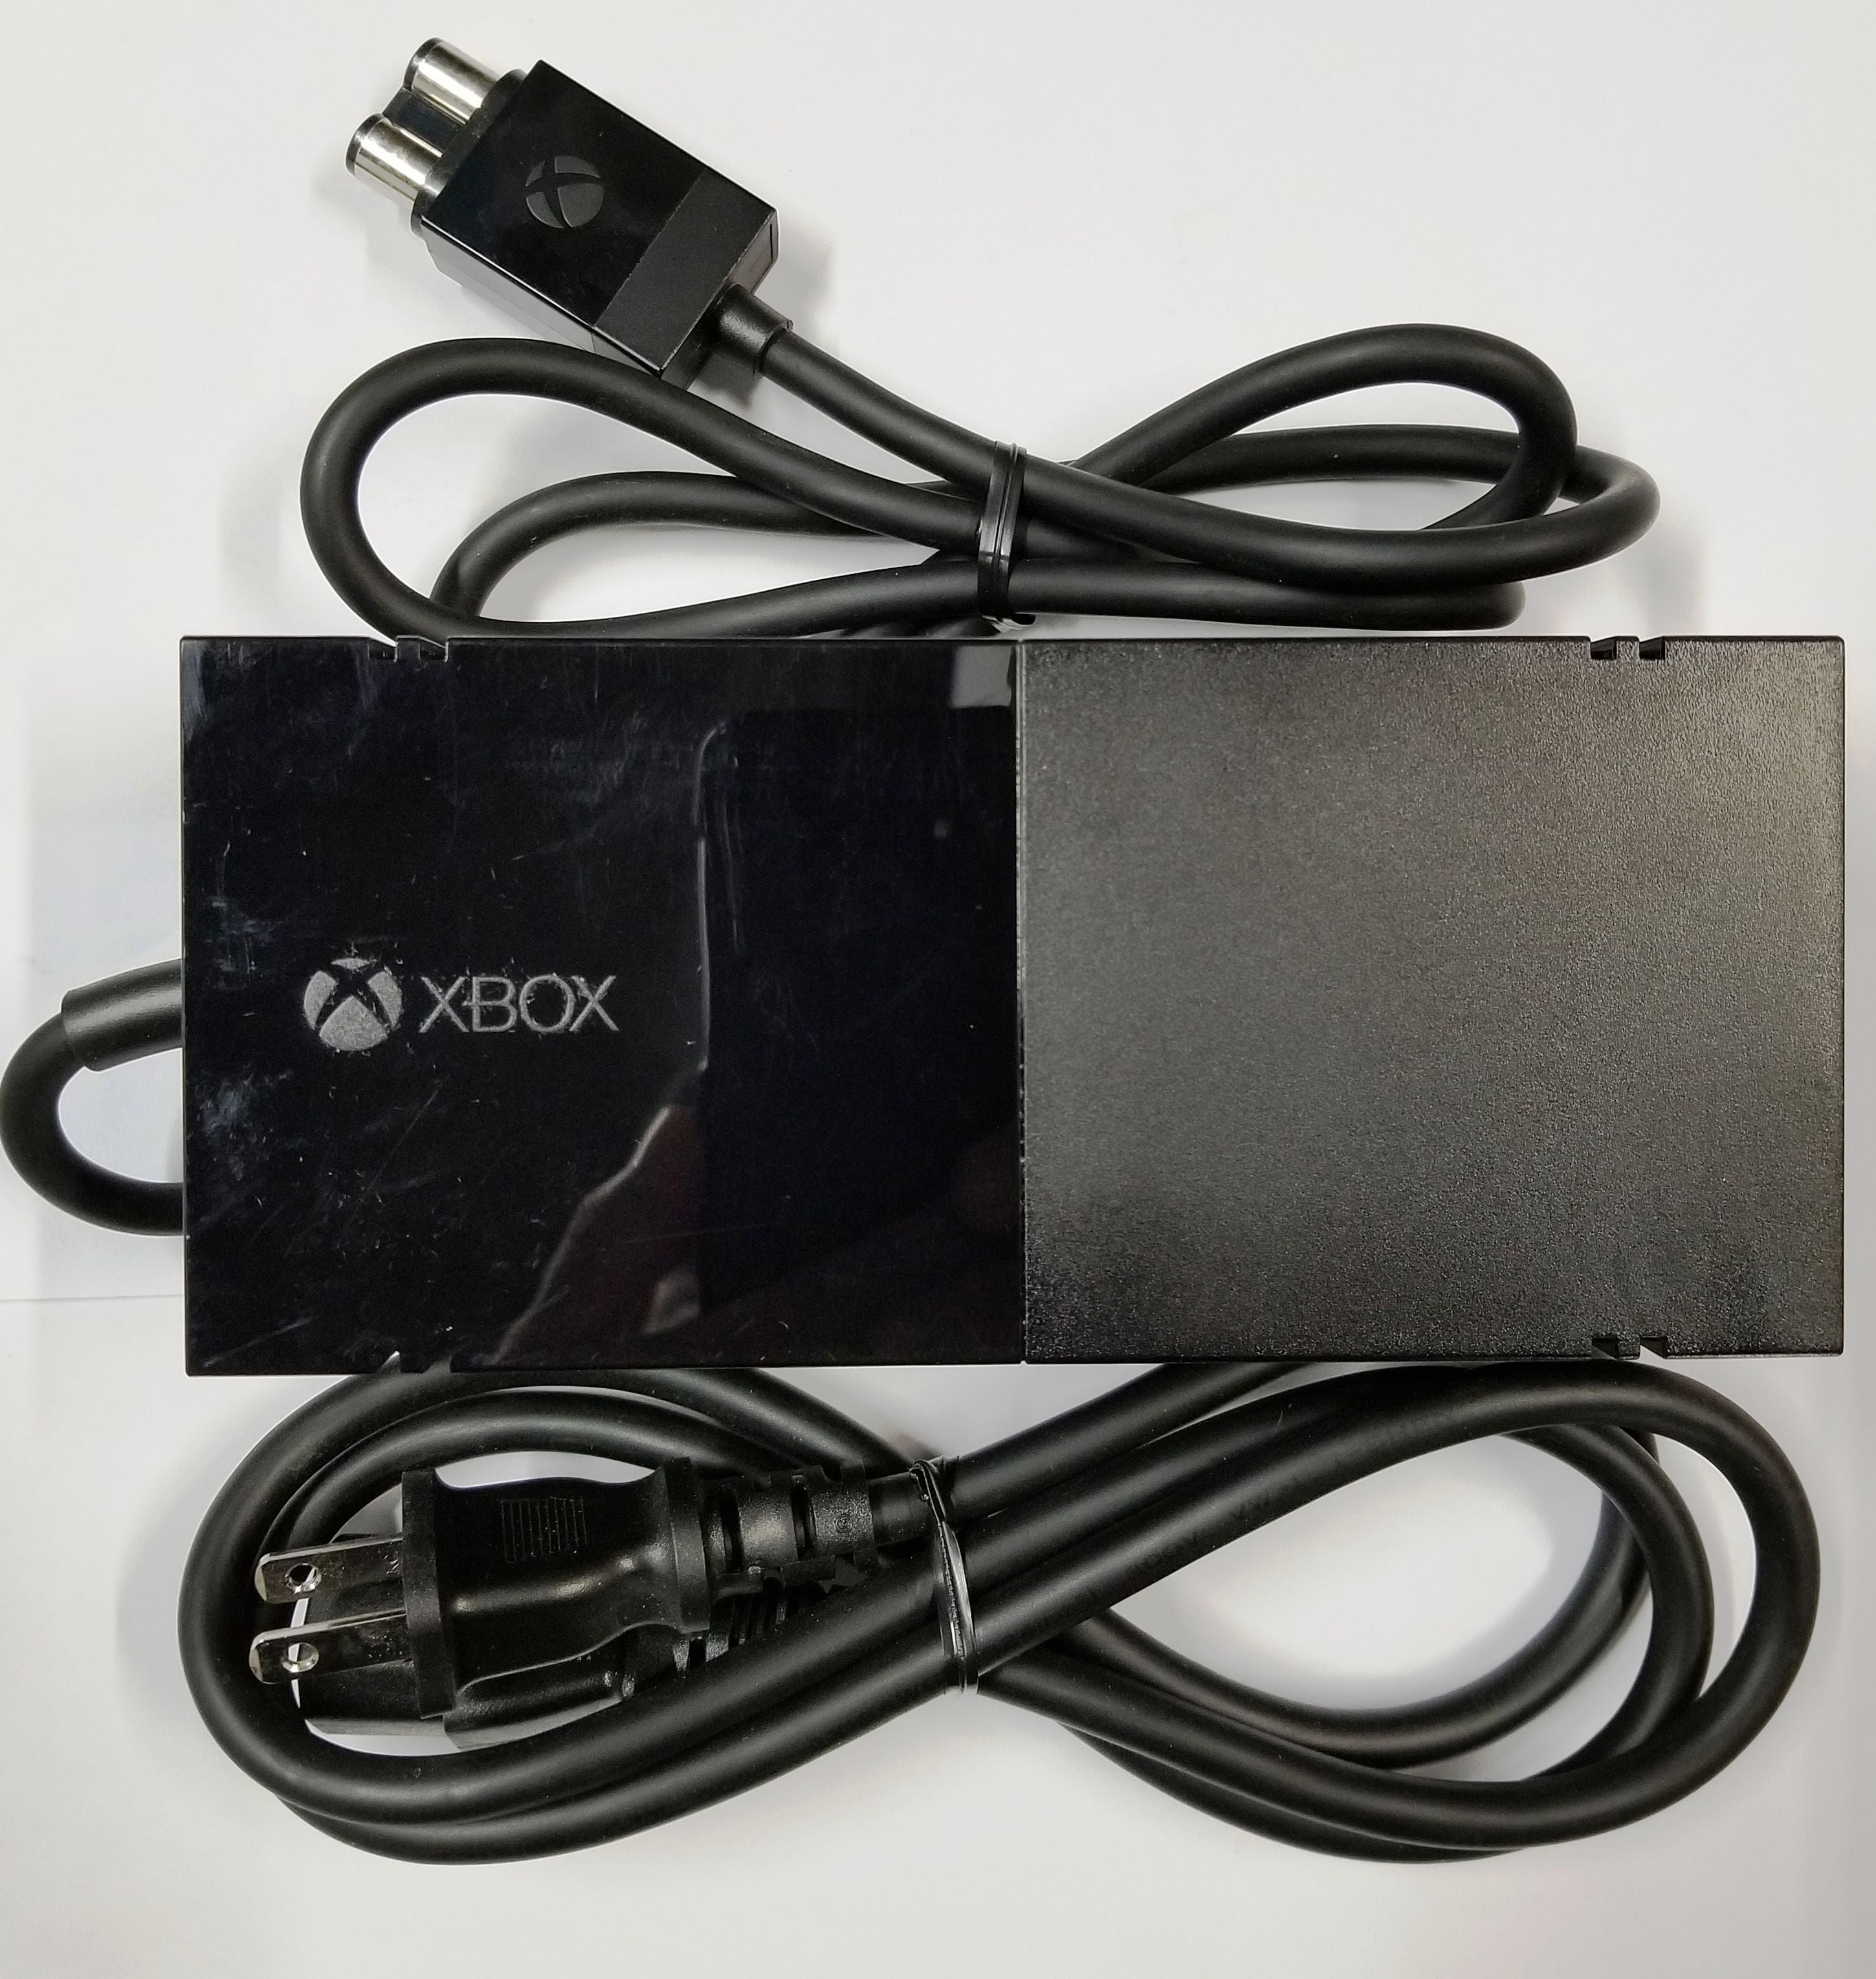 Power Supply for Xbox One, Replacement Power Brick Adapter